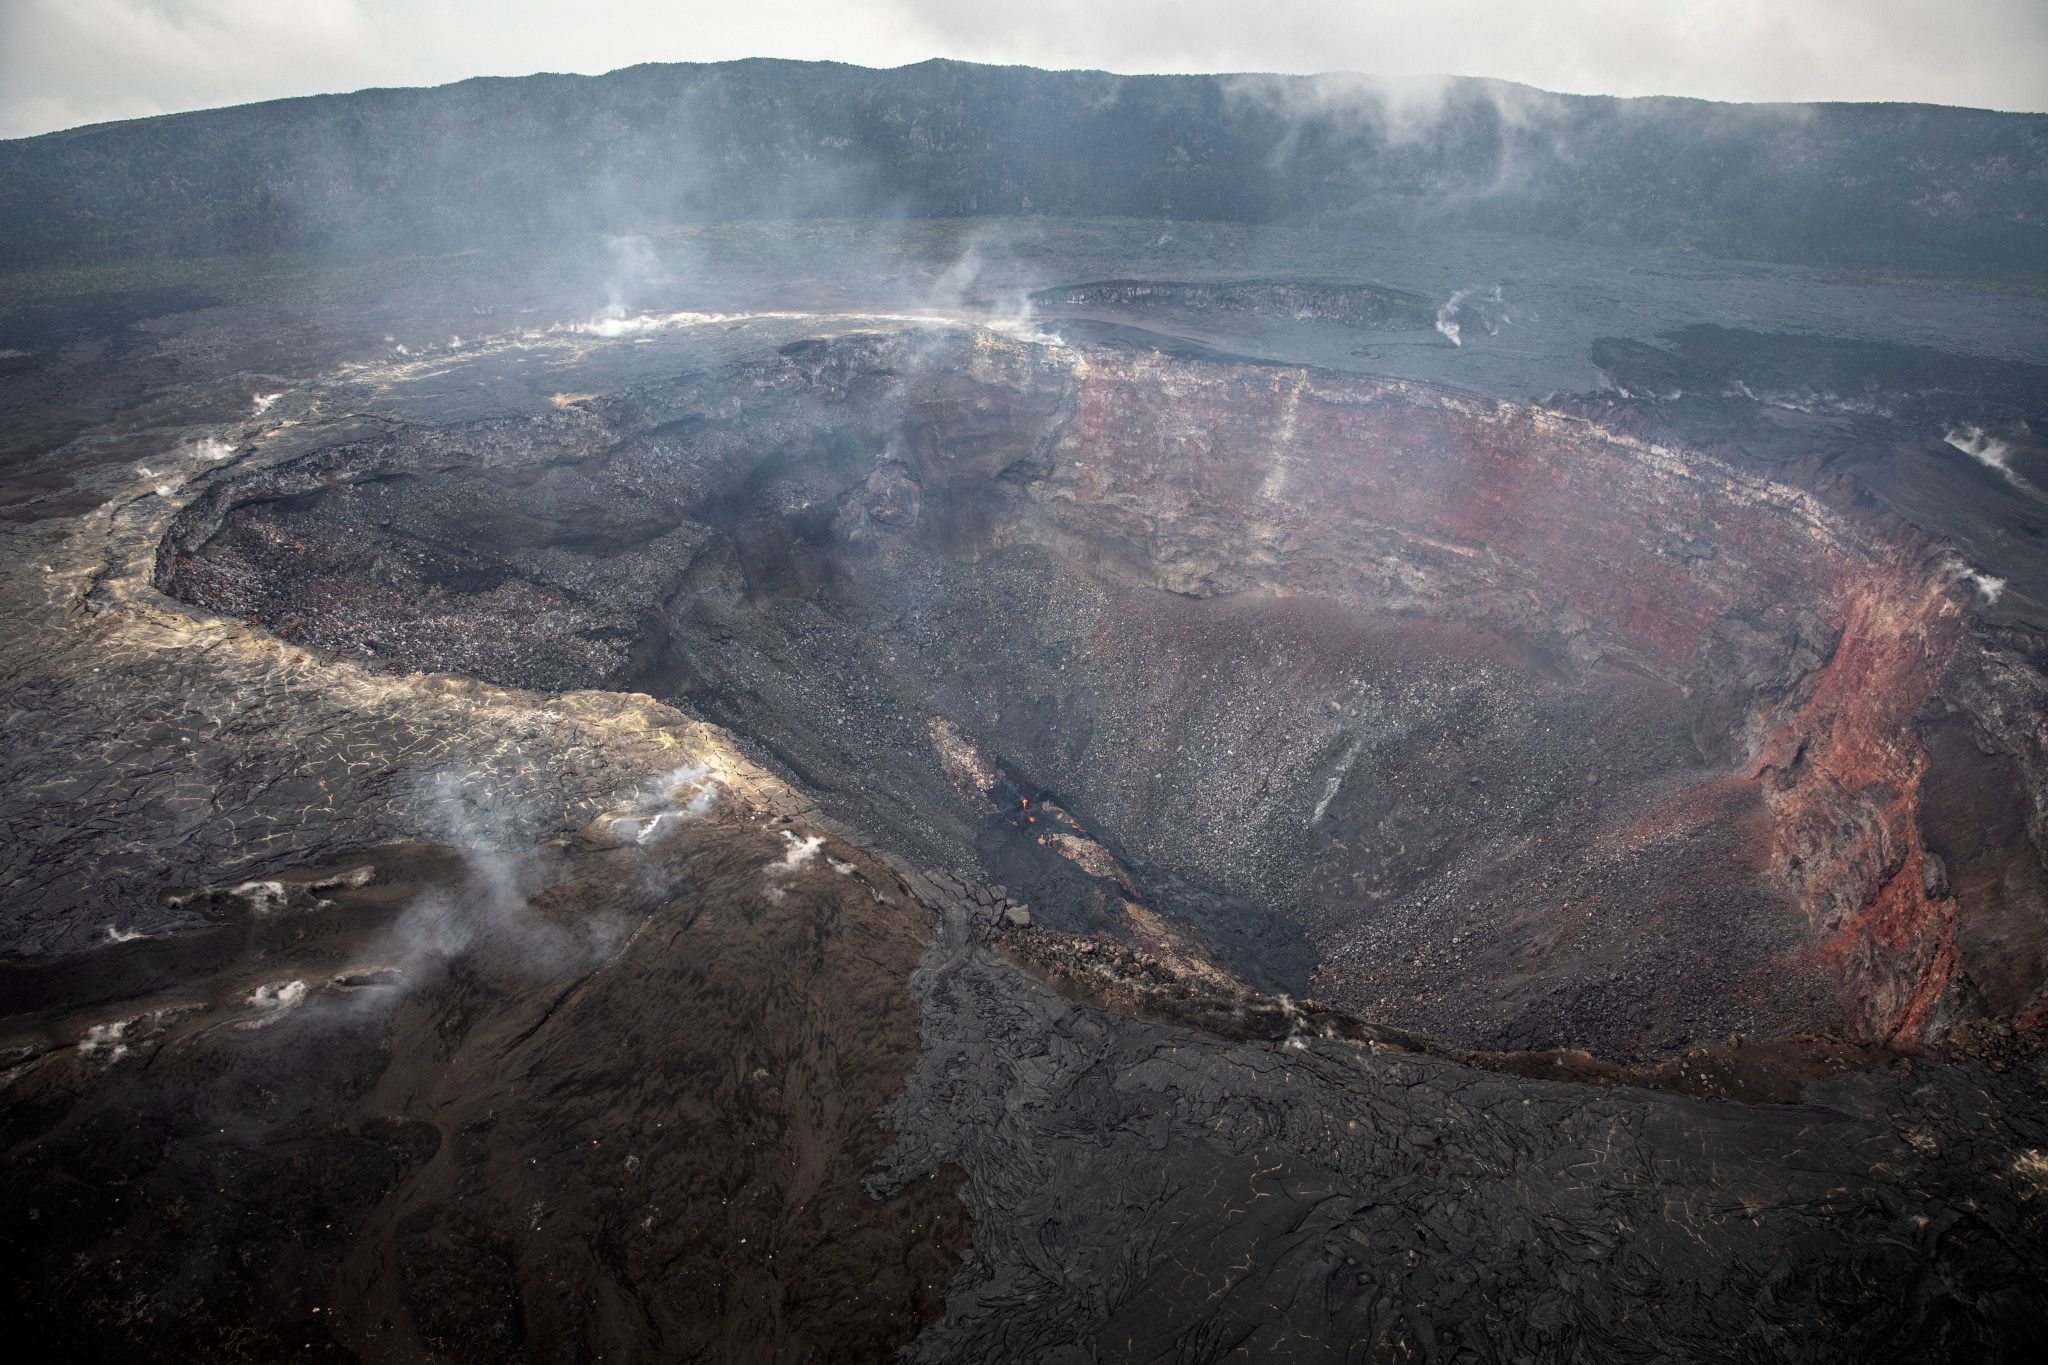 Mount Nyamulagira, North Kivu Province, May 2021. Smoke and fumes in the crater eight days after the eruption of the adjacent Mount Nyiragongo.